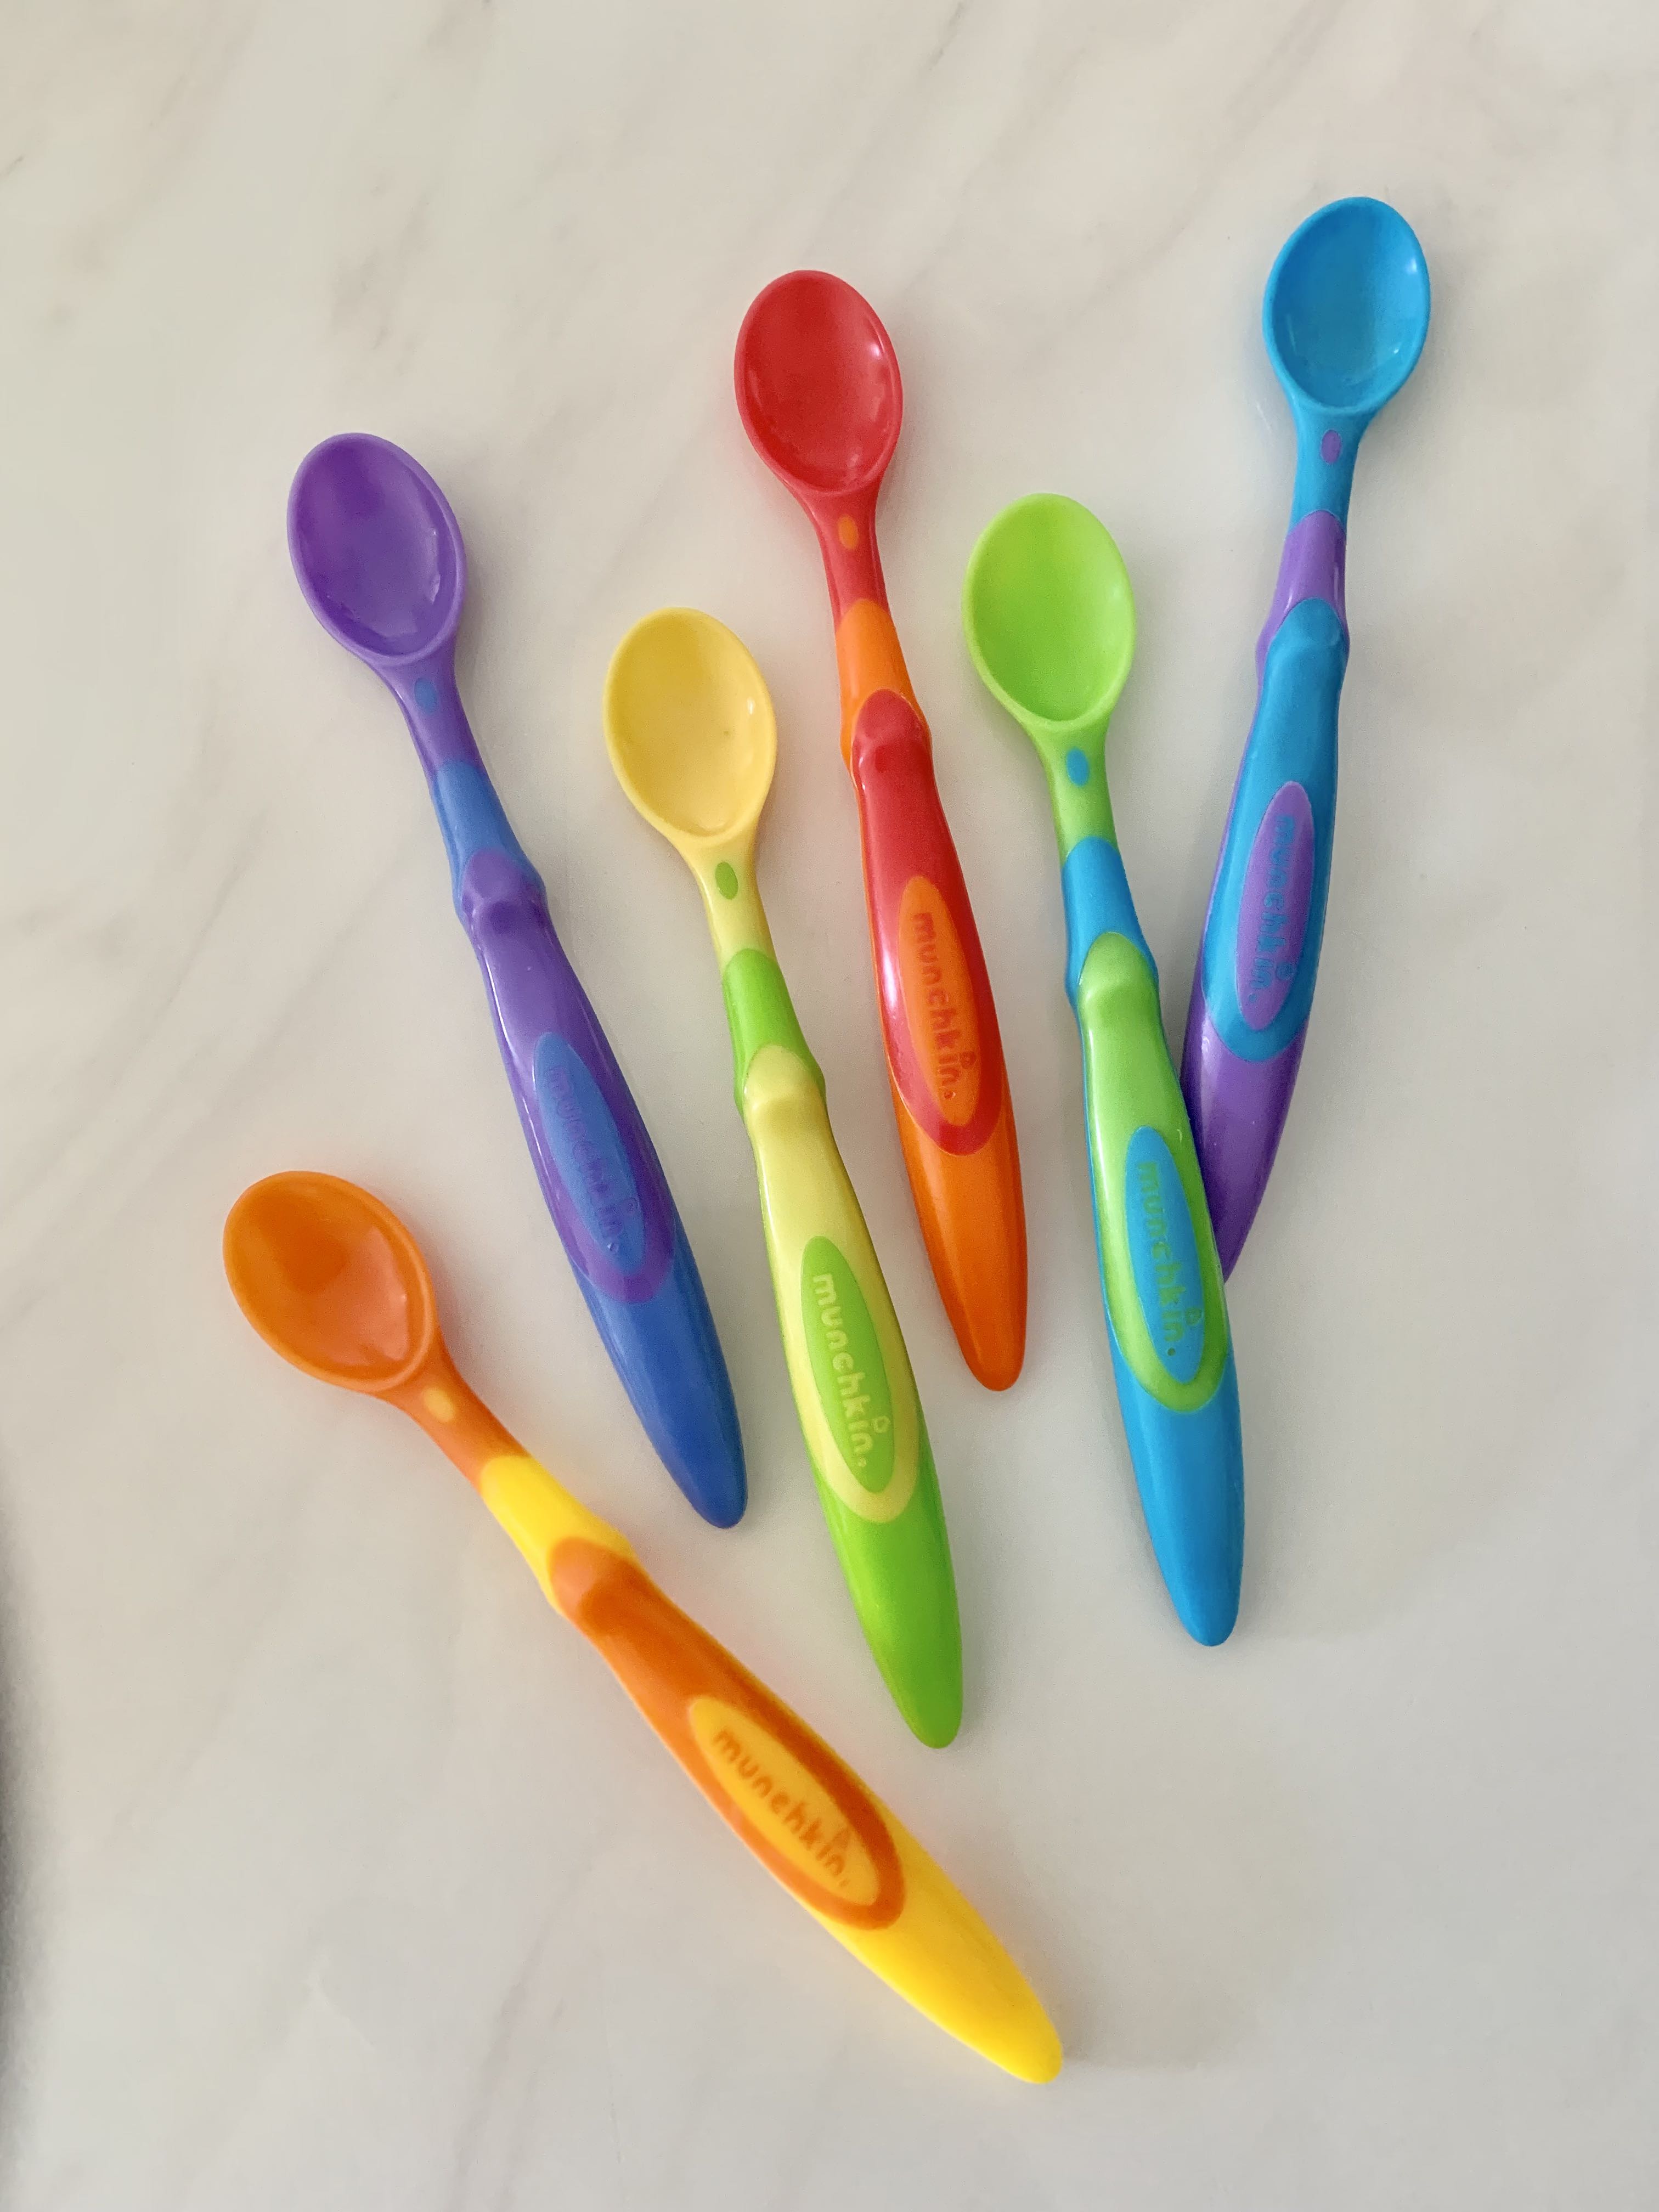 https://media.karousell.com/media/photos/products/2021/9/29/munchkin_softtip_infant_spoons_1632898277_f8e25037.jpg